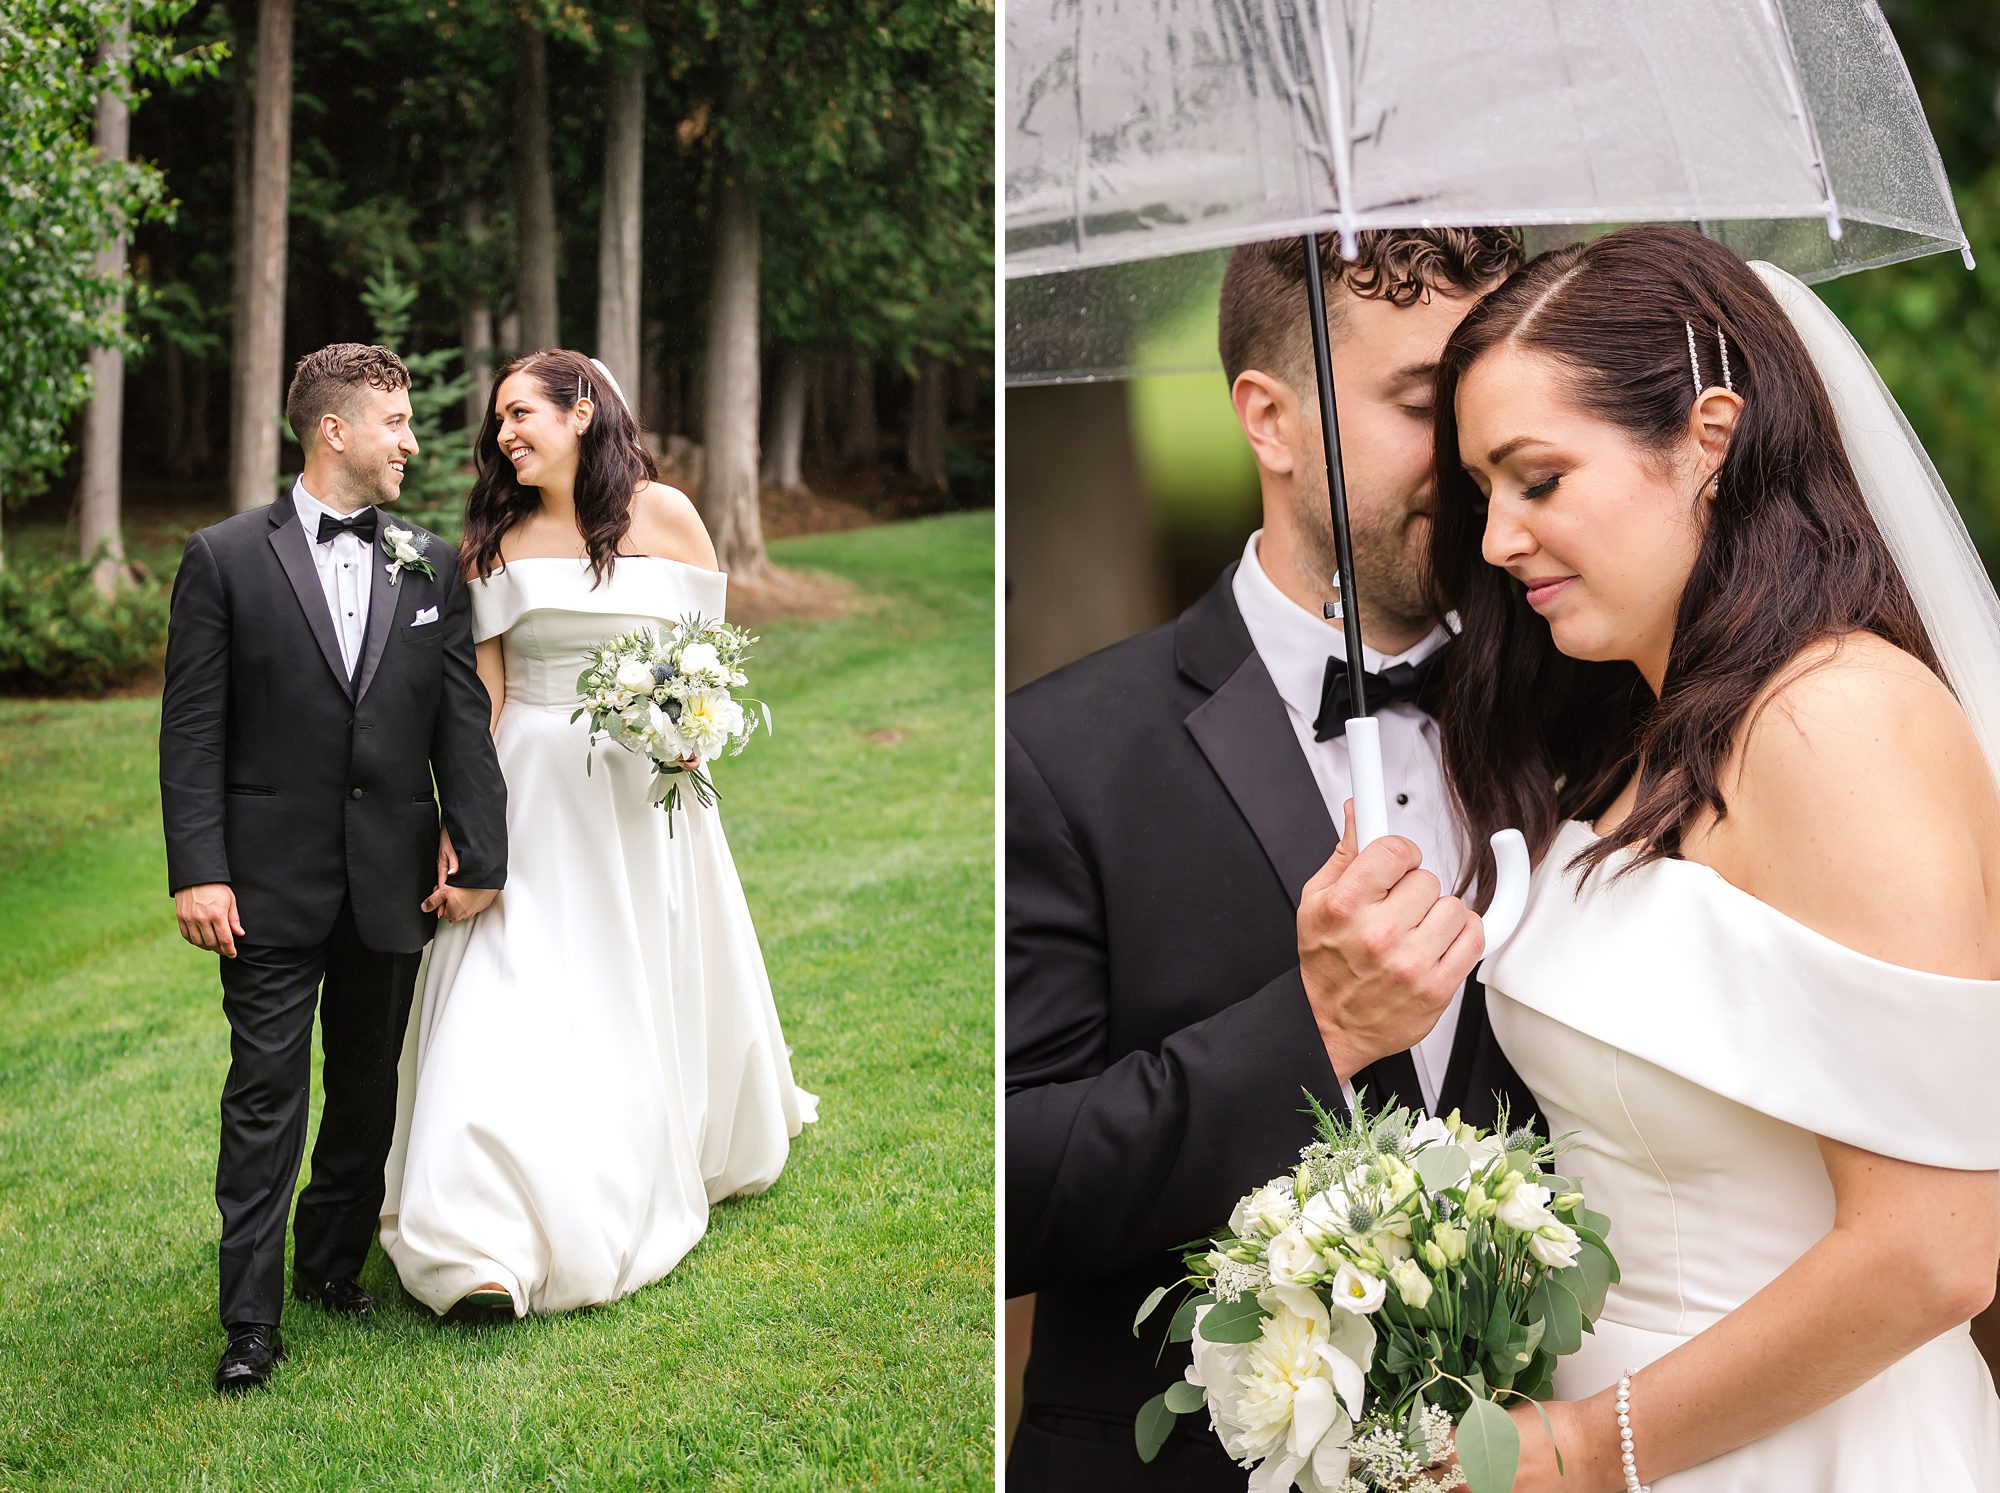 Bride and groom portraits on rainy wedding day in Cornwall, ON